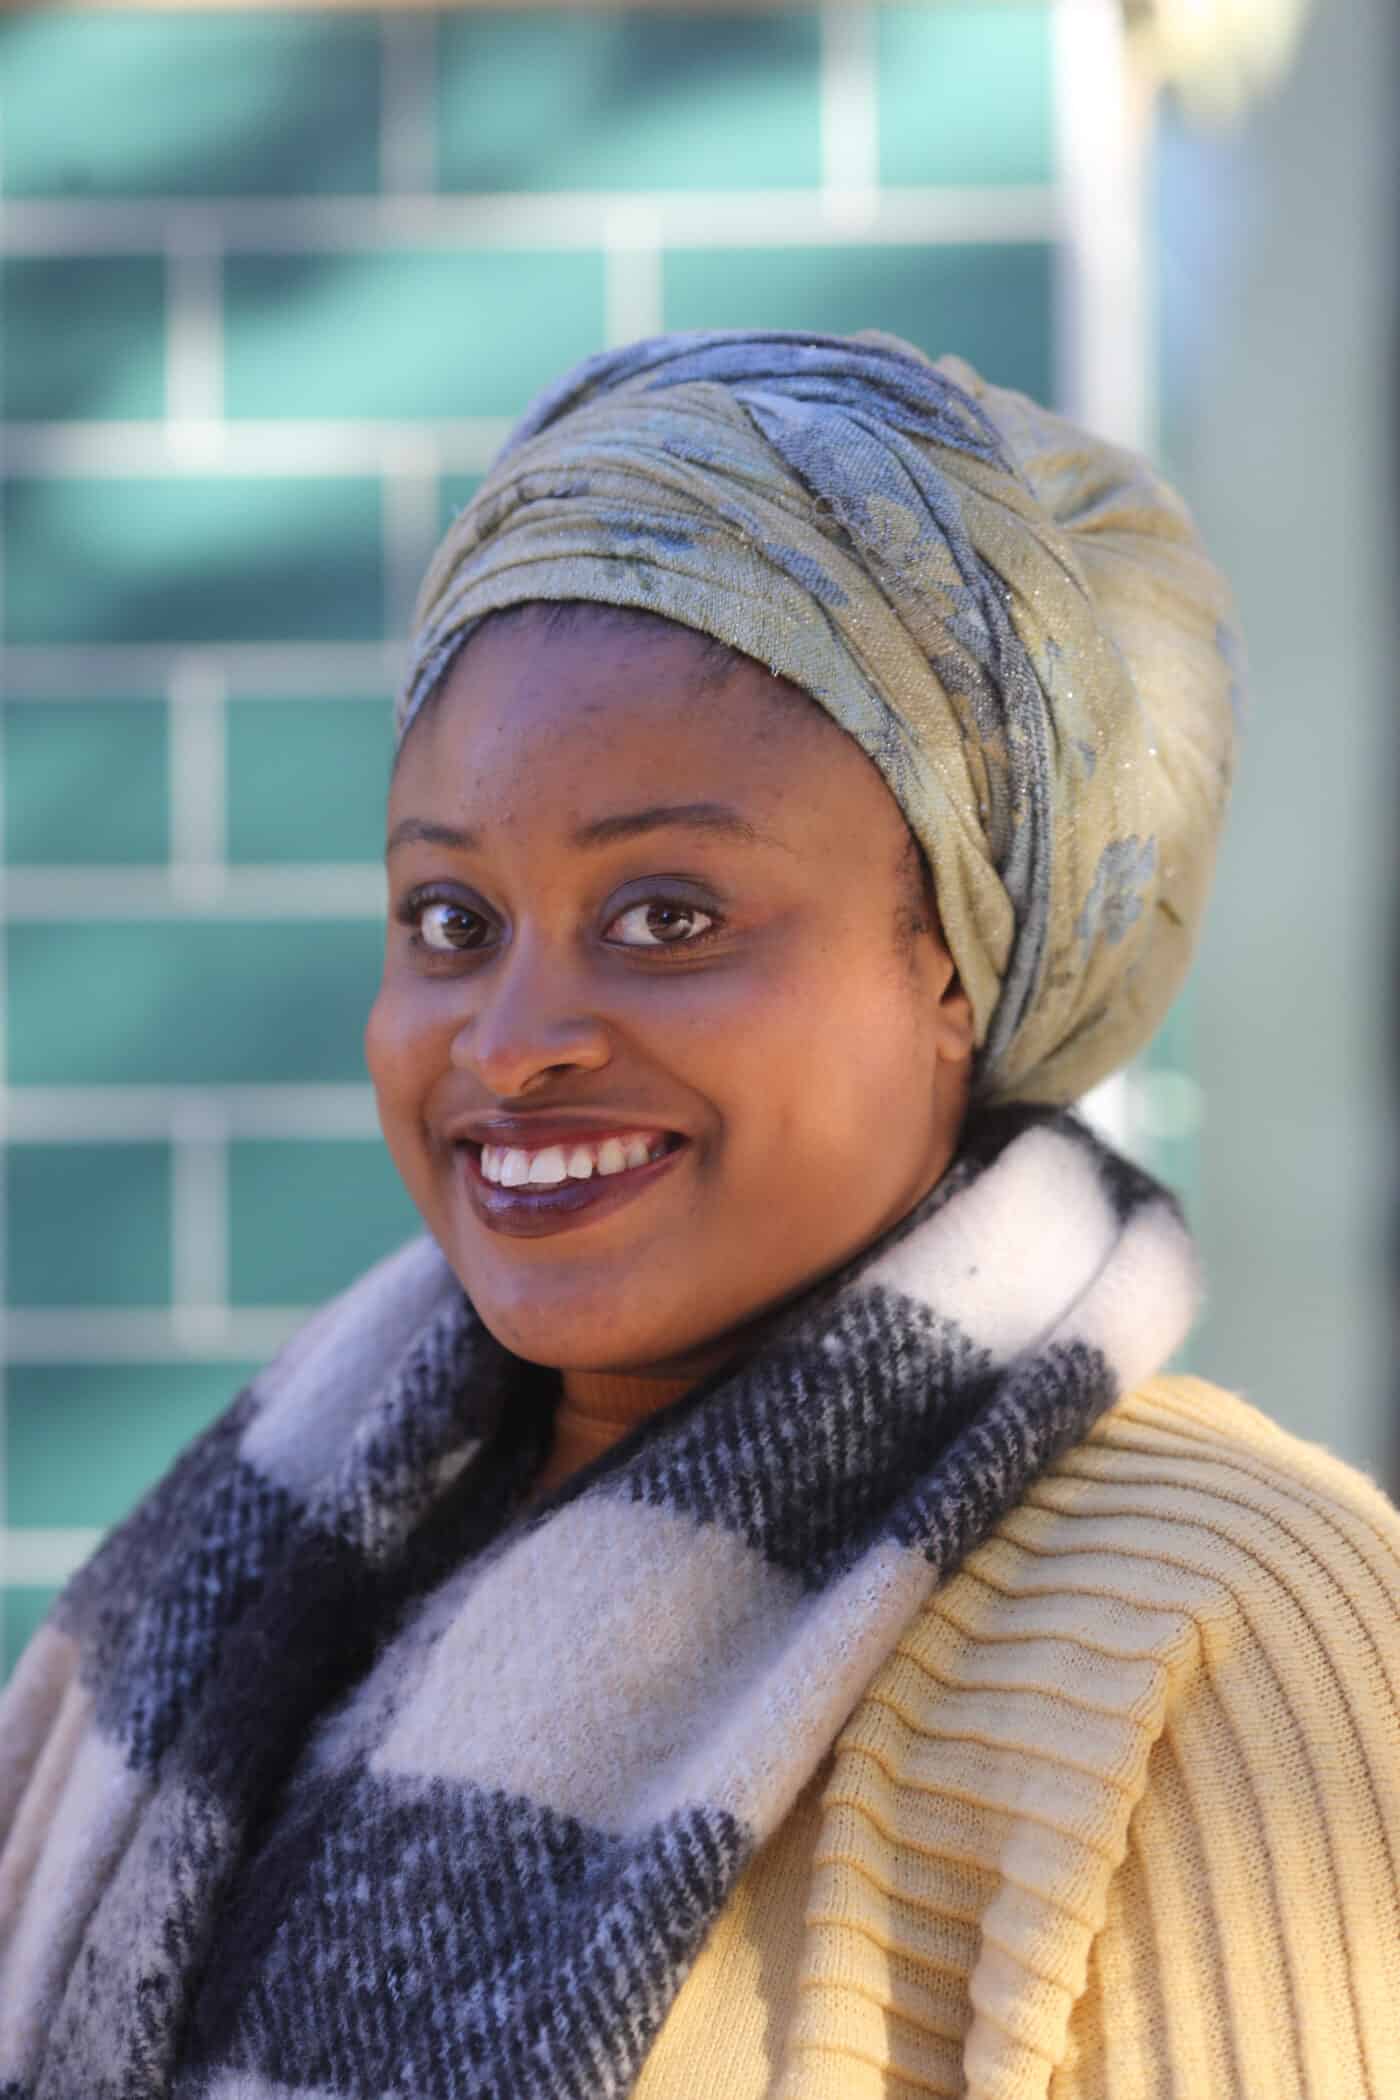 Britny, who is a black female with brown skin wearing a green and blue headwrap and a yellow cardigan.